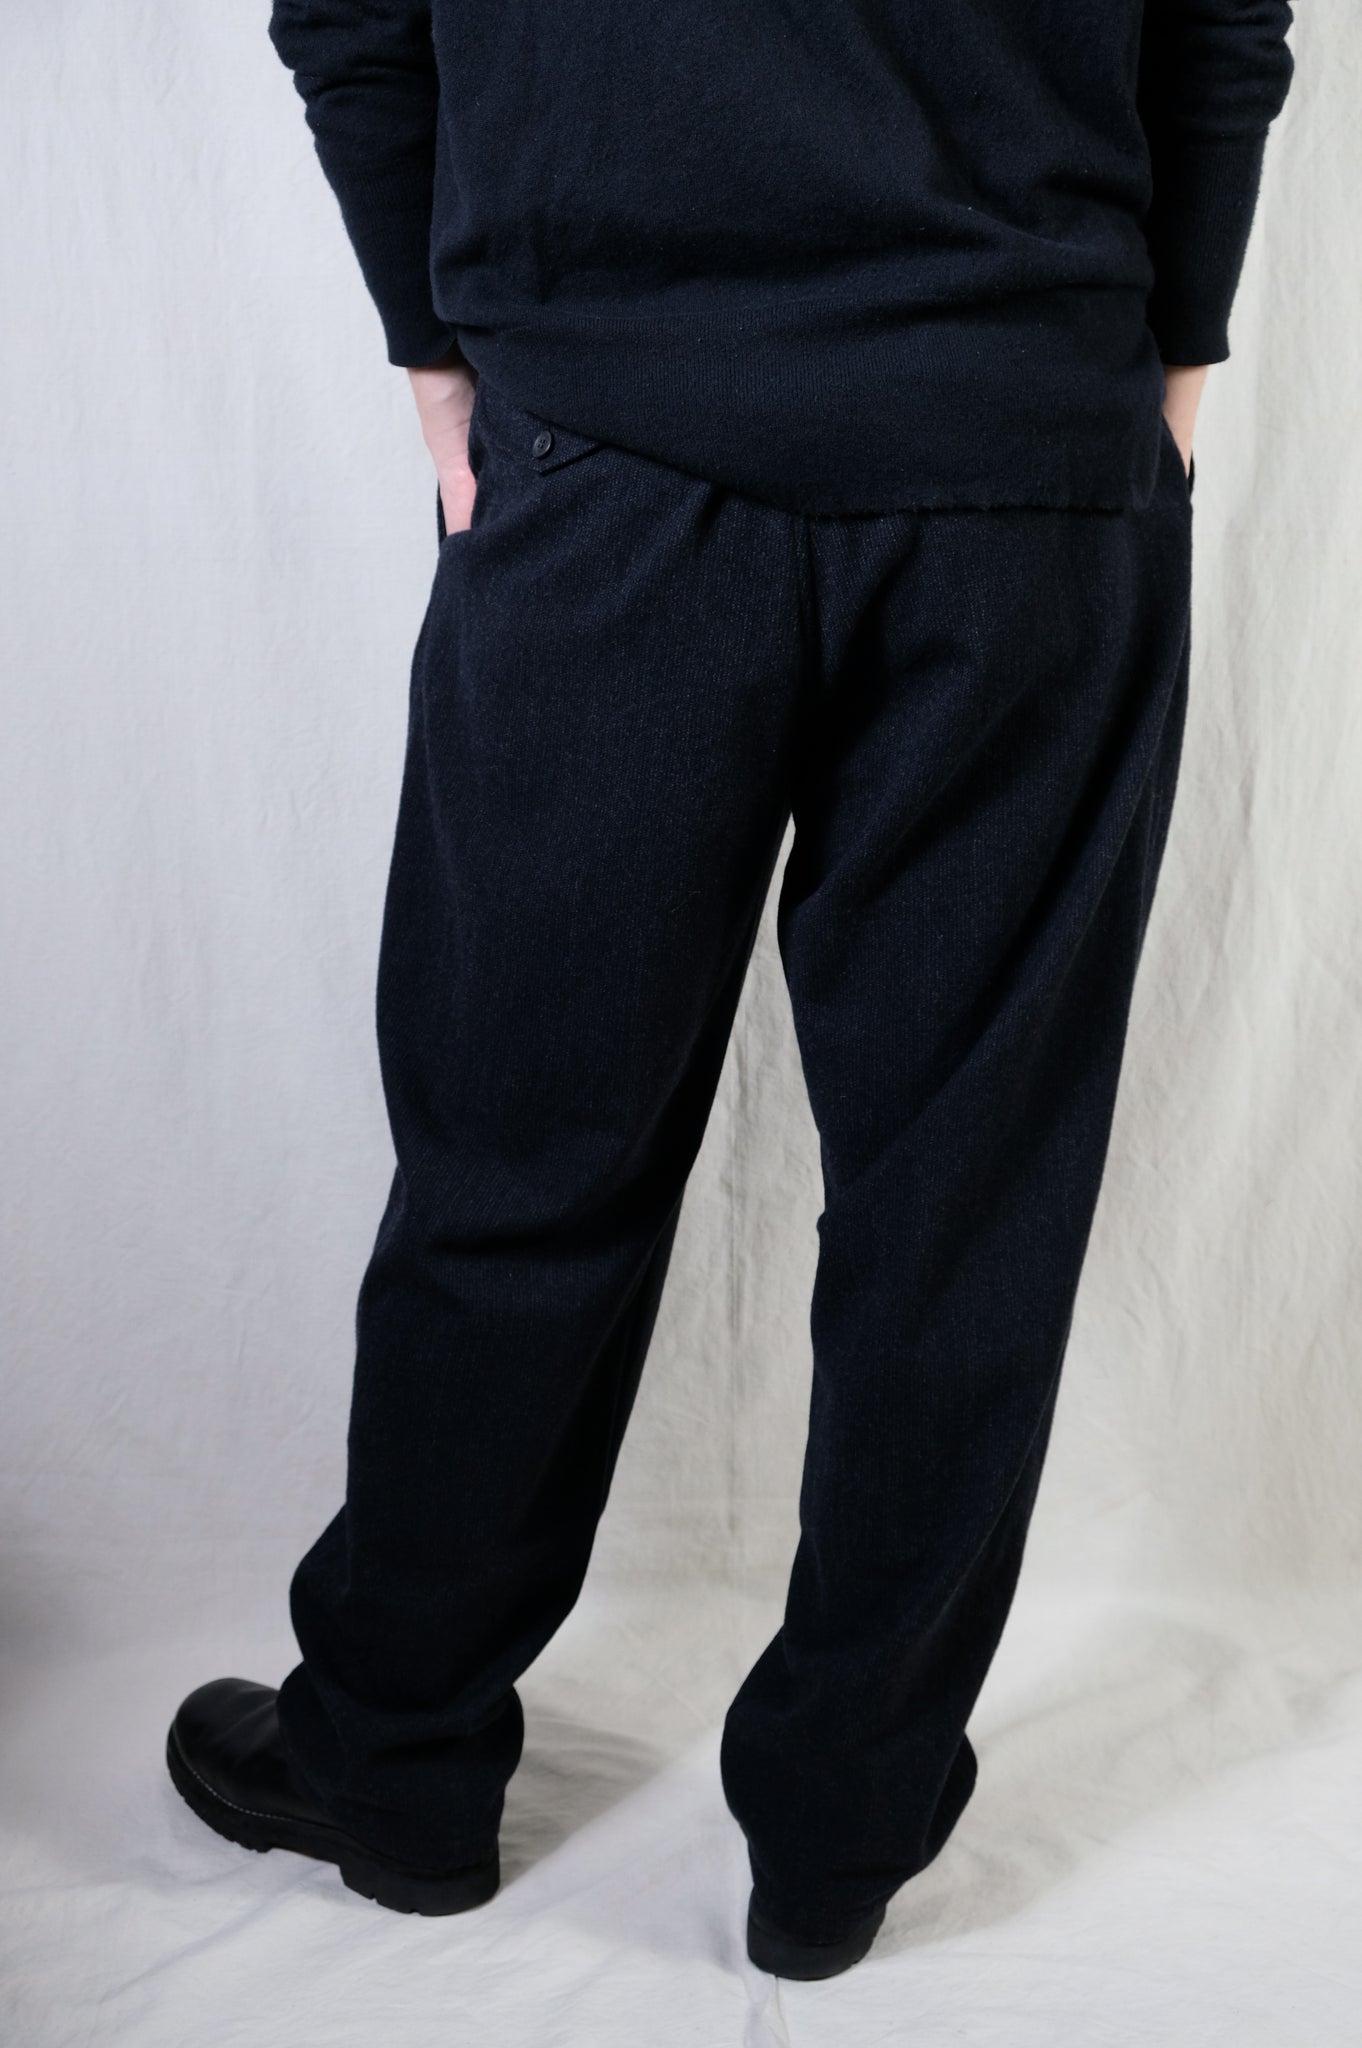 Pull-on Pants Heather Charcoal CK135A - The Nursing Store Inc.